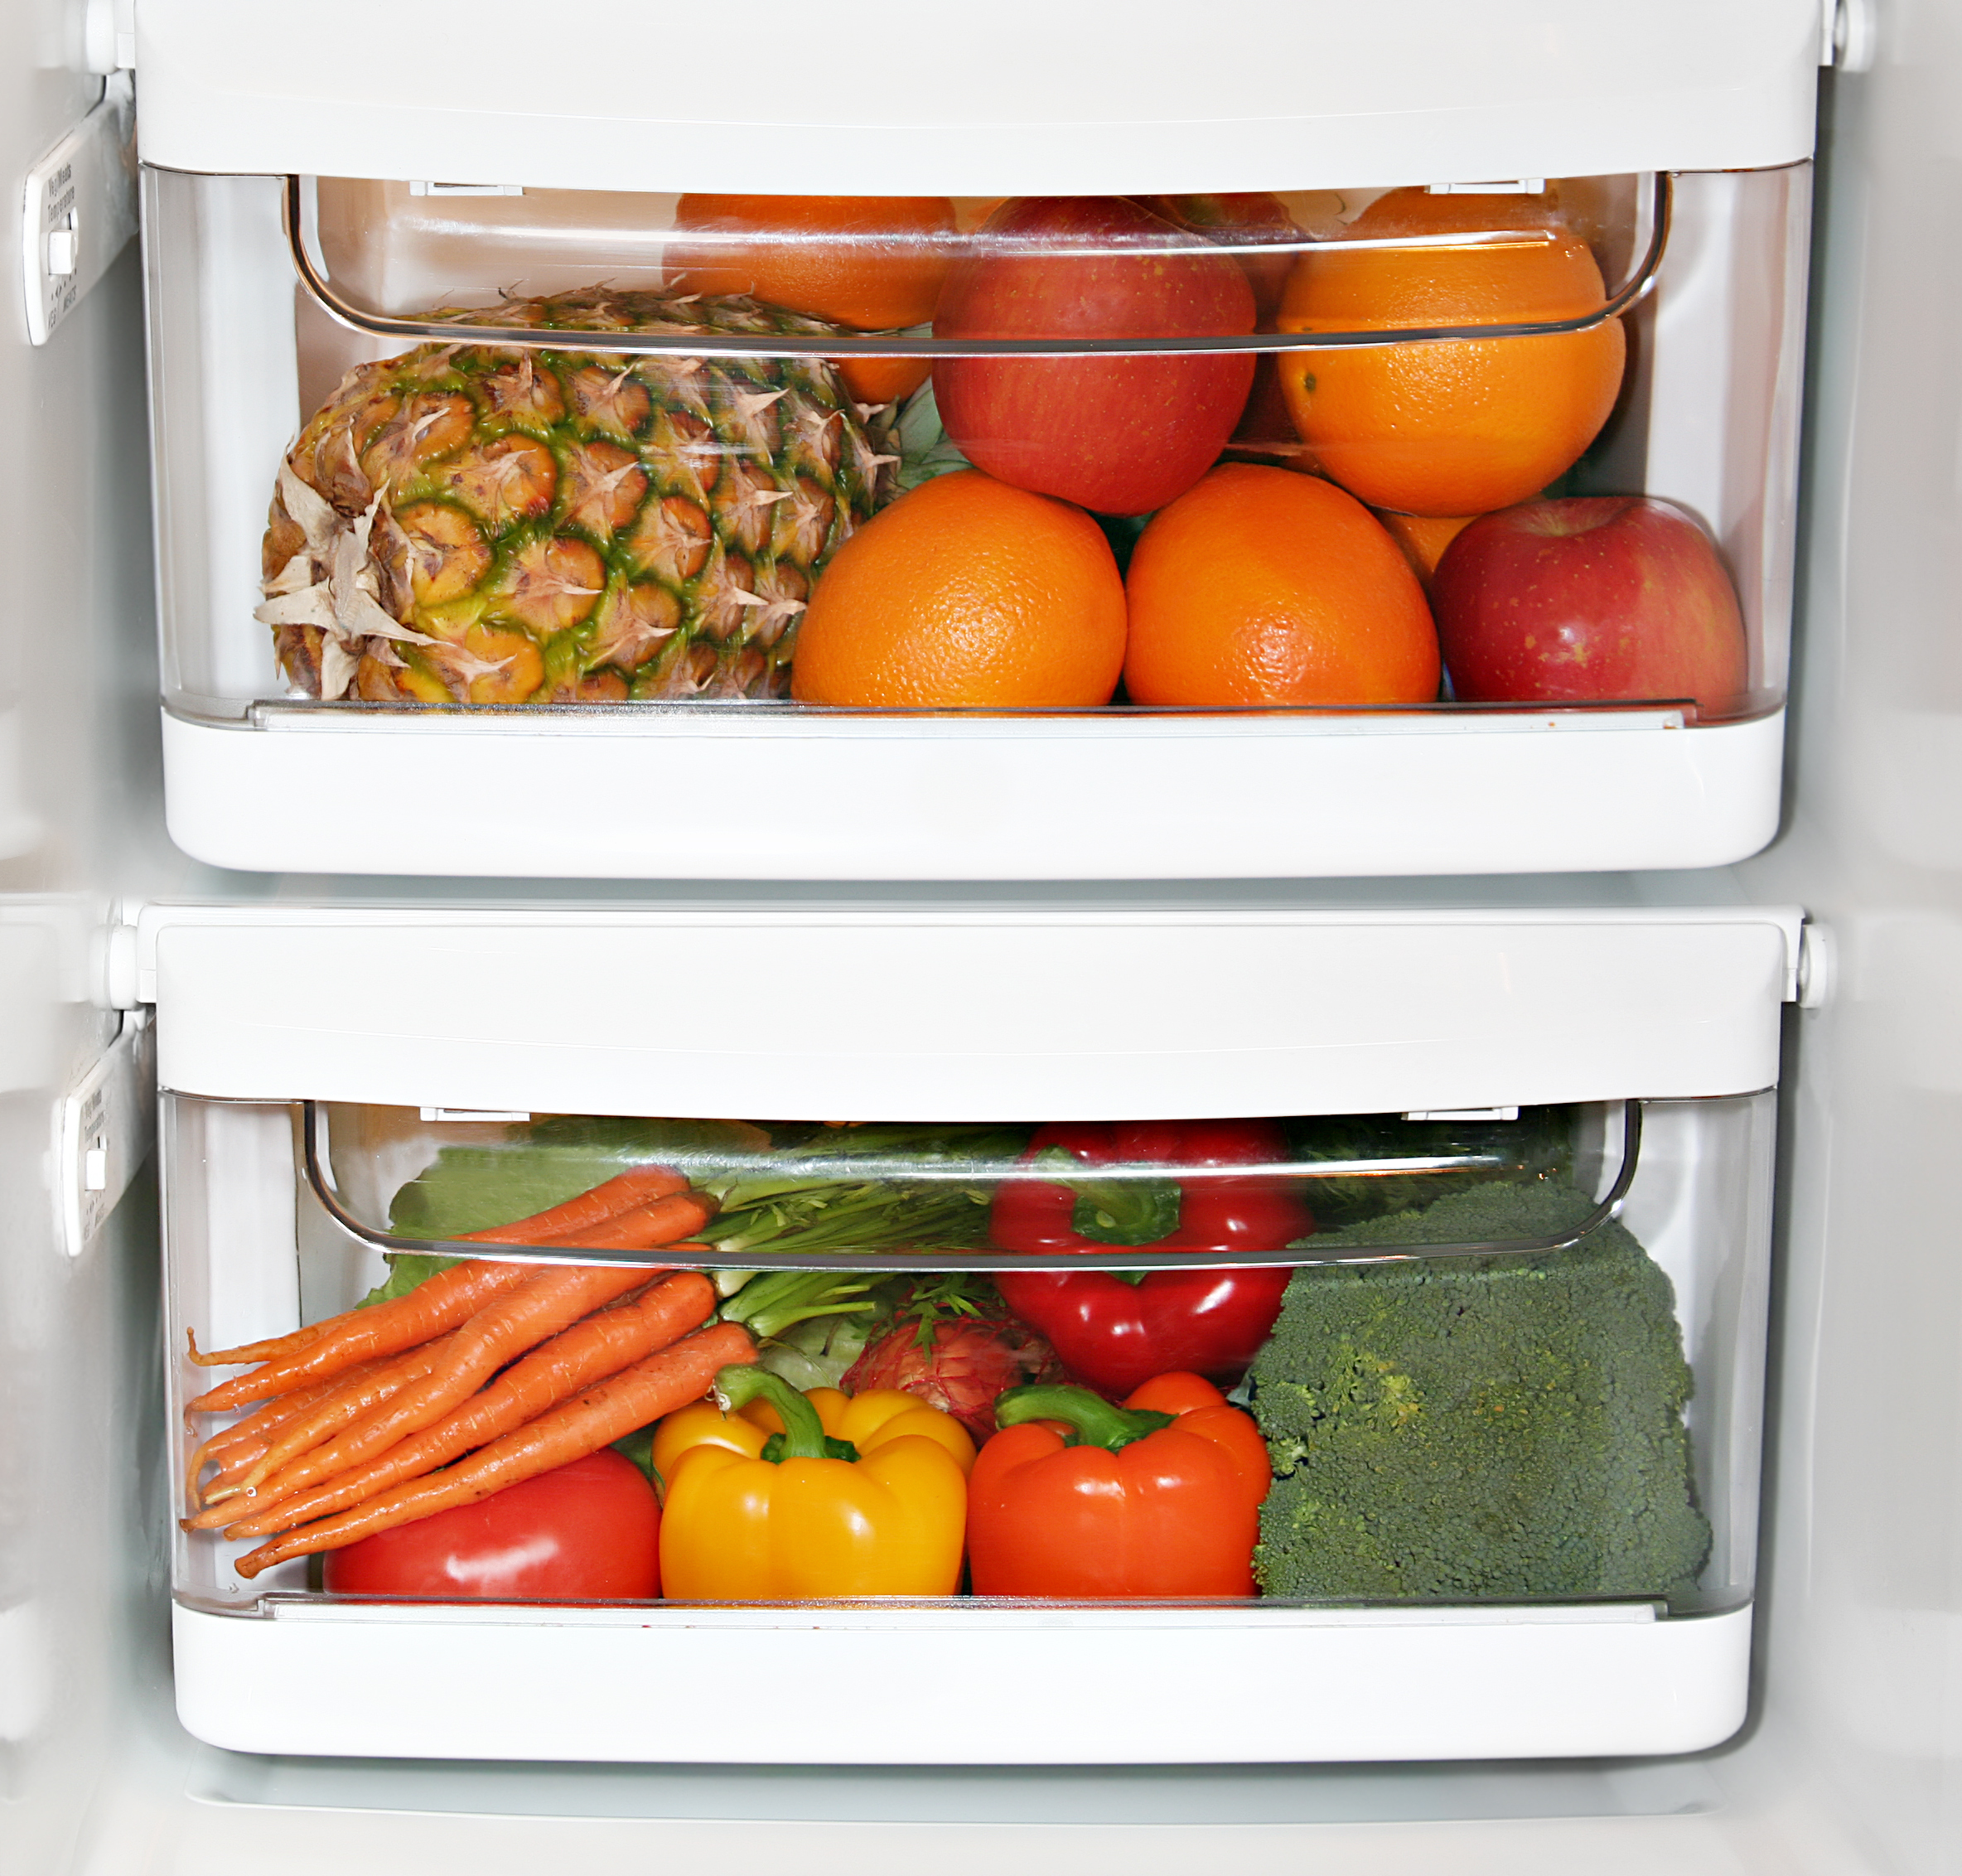 Fruits and vegetables in refrigerator drawers